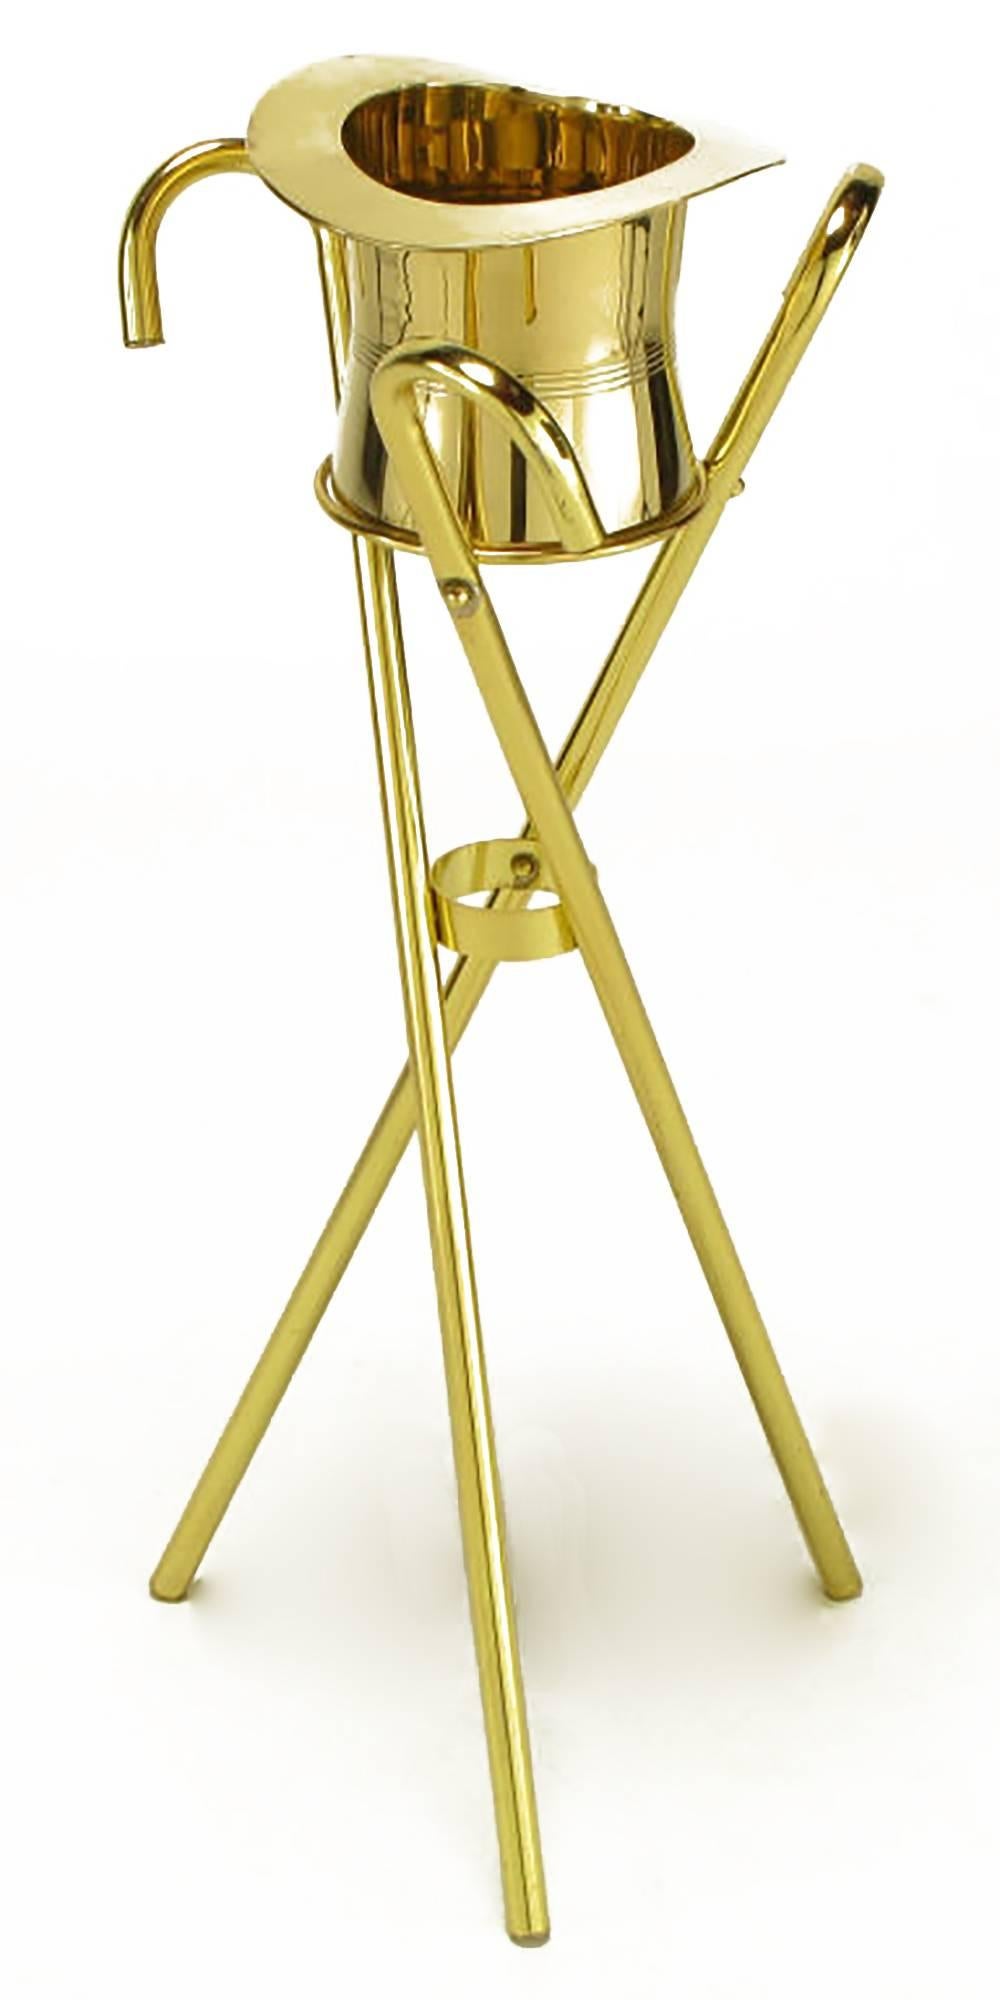 Unique and inspired champagne cooler or ice bucket on three canes in tripodal form stand. Solid brass top hat and brass-plated canes.